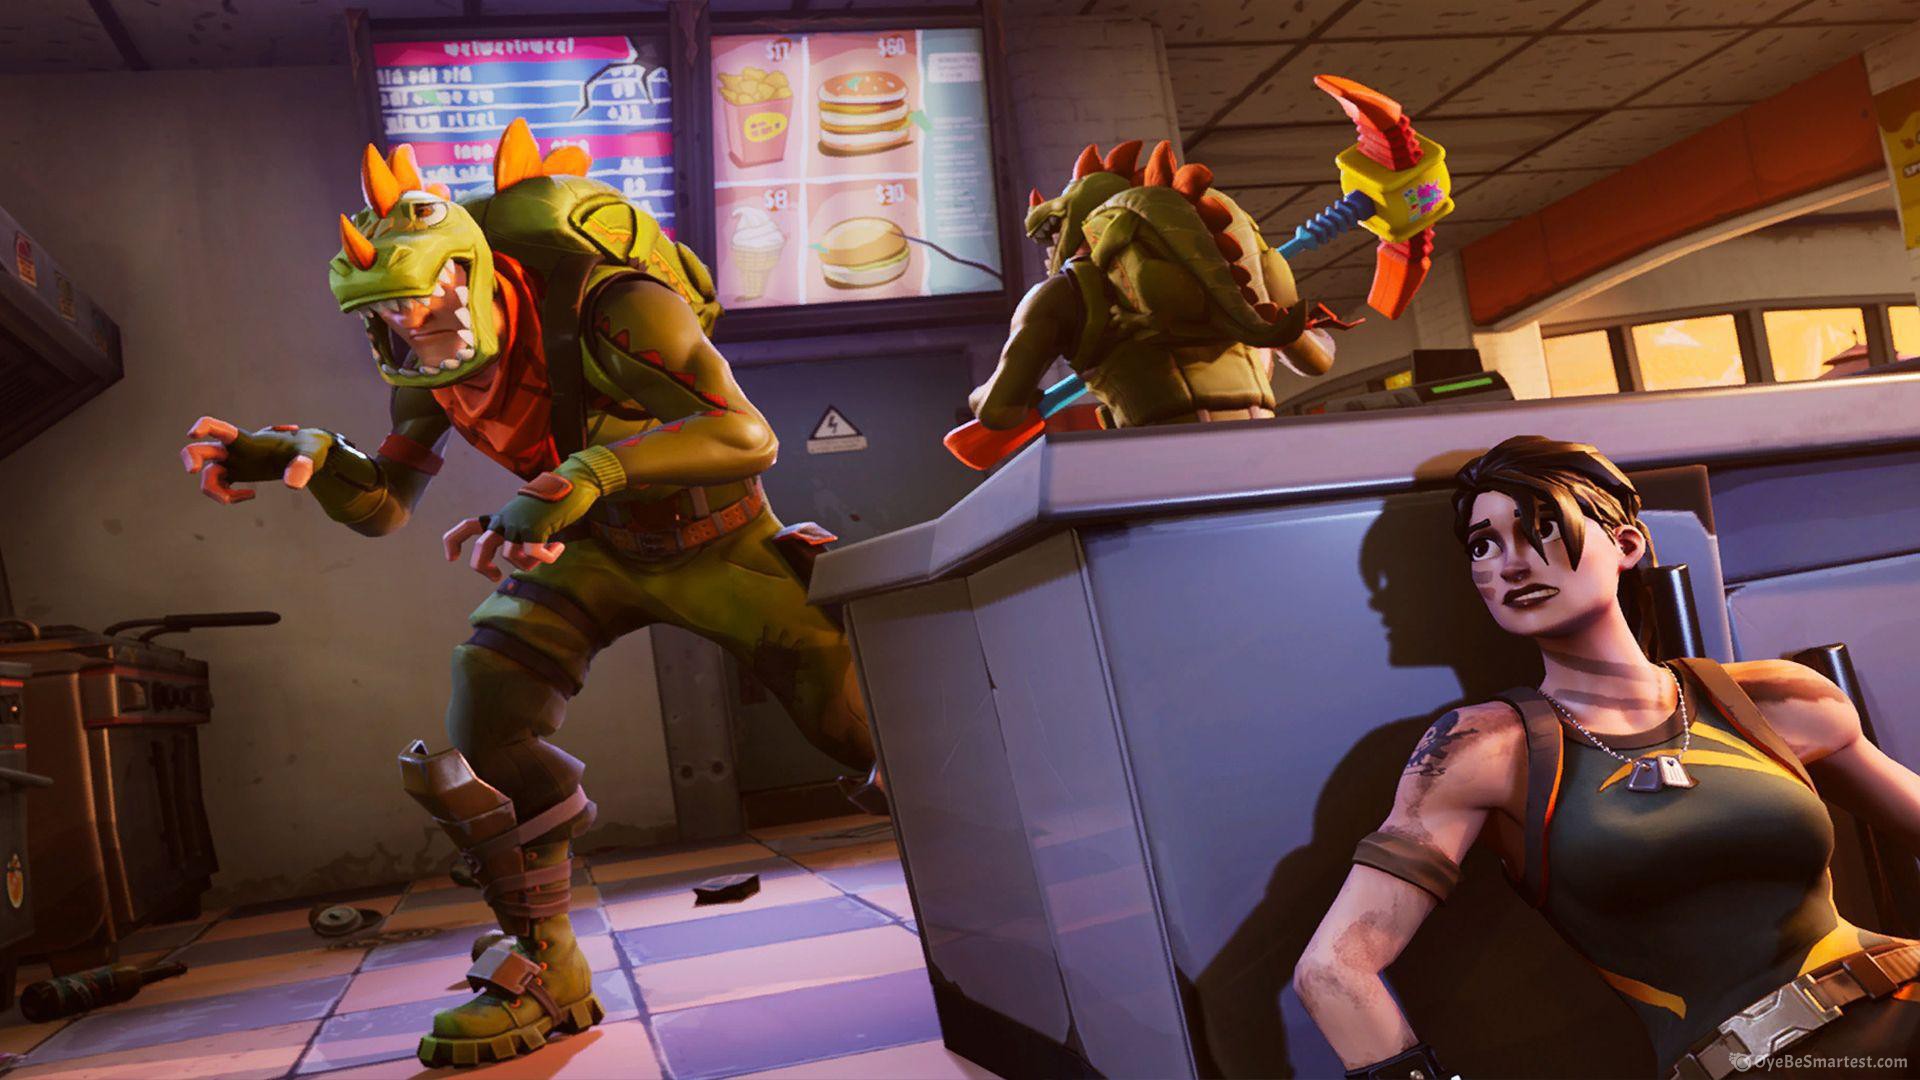 best battle royale games - a female Fortnite character hiding from two characters in dinosaur costumes